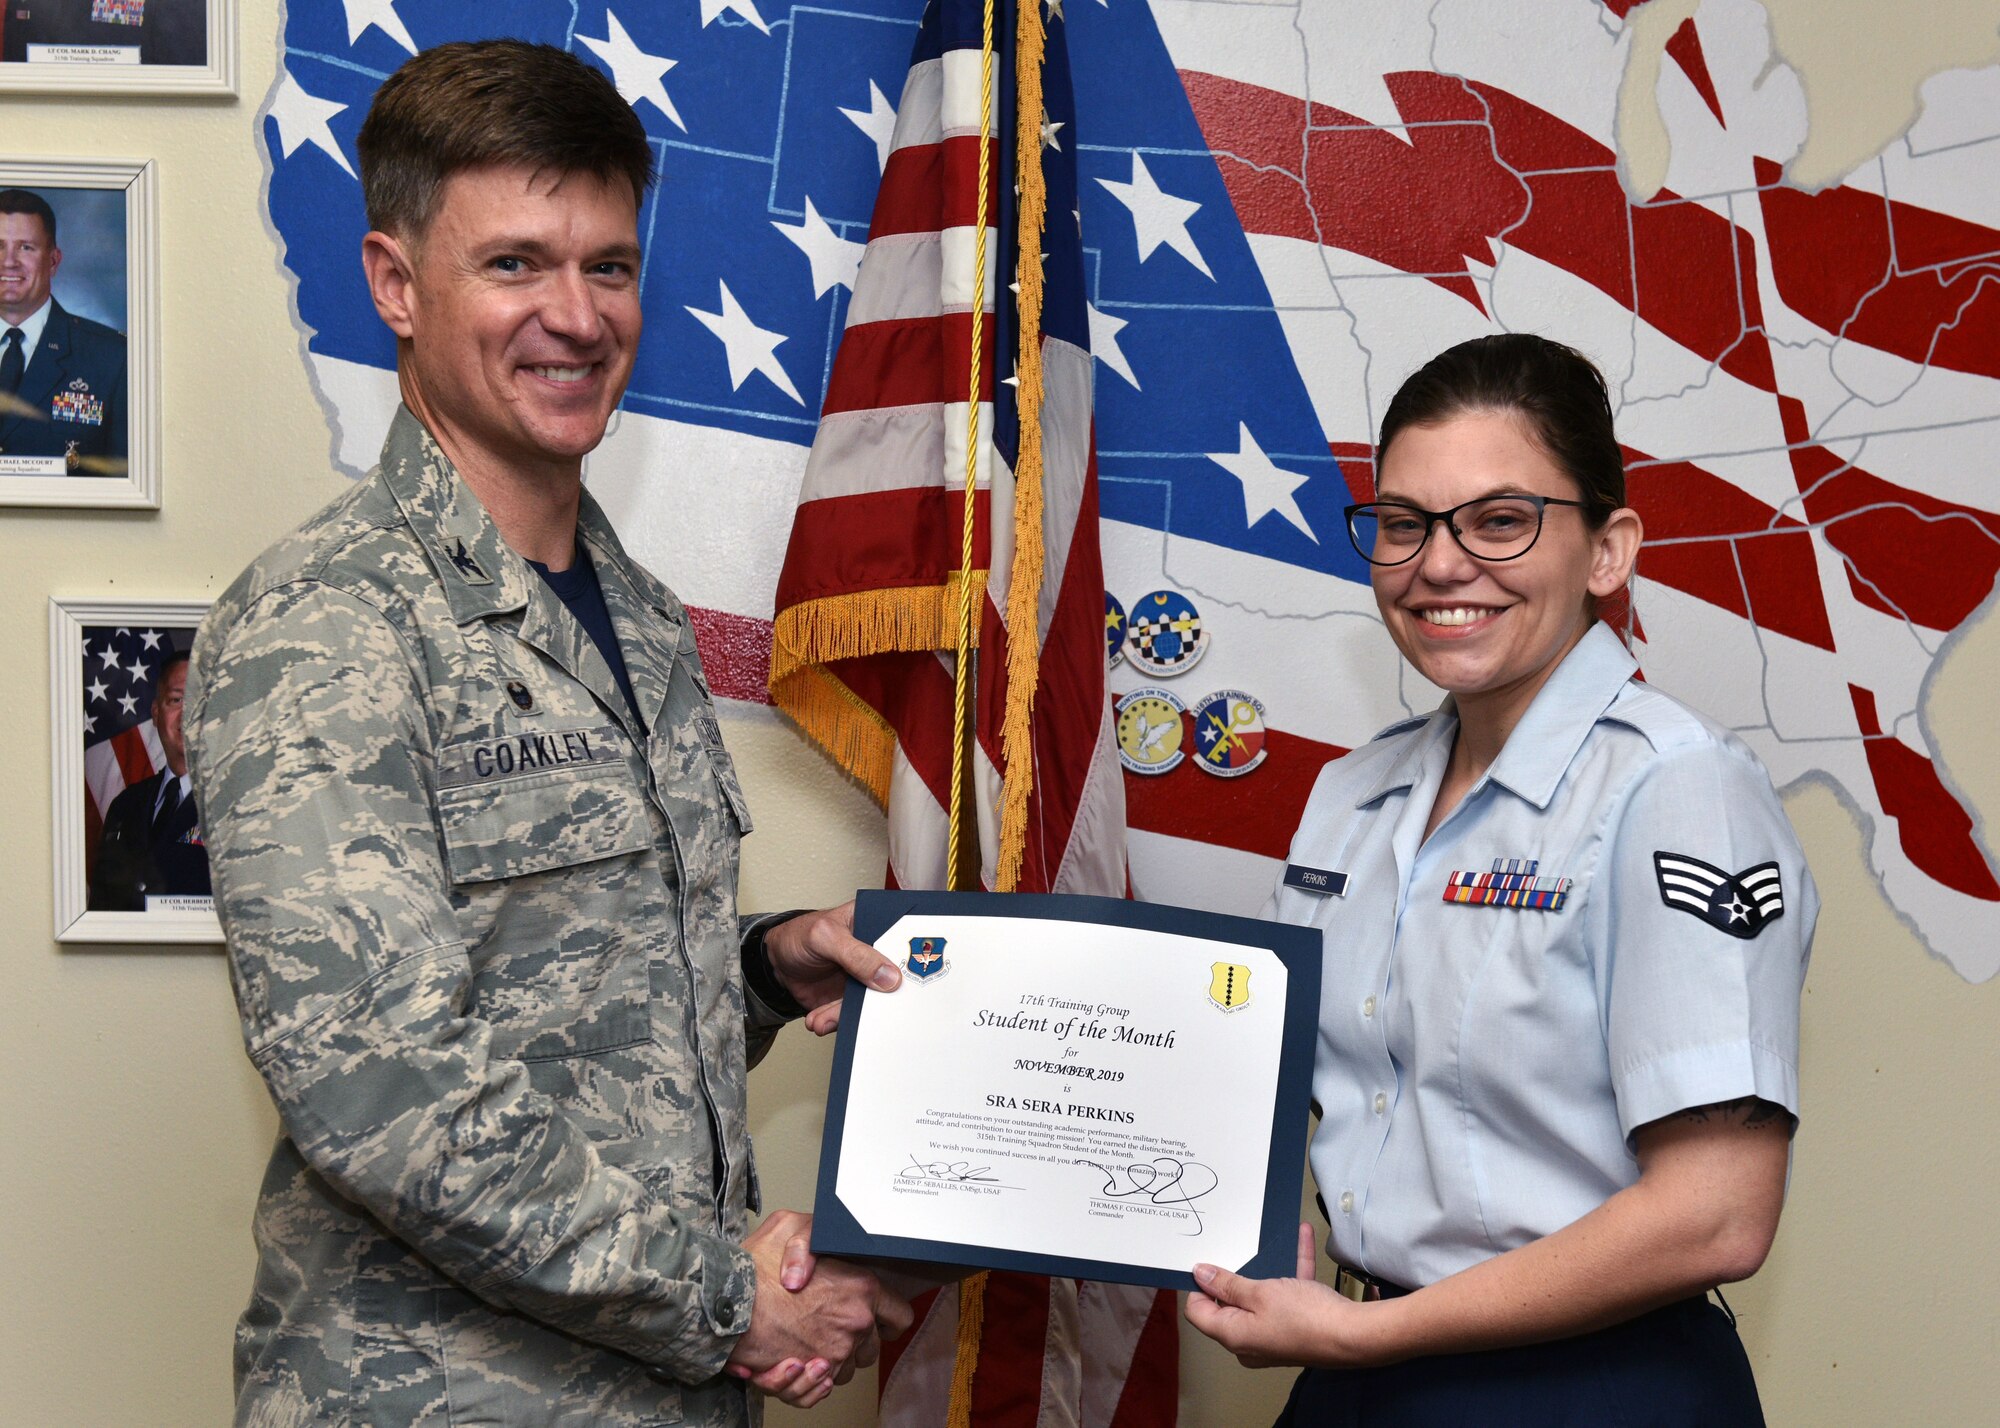 U.S. Air Force Col. Thomas Coakley, 17th Training Group commander, presents the 315th Training Squadron Student of the Month award to Senior Airman Sera Perkins, 315th TRS student, at Brandenburg Hall on Goodfellow Air Force Base, Texas, Dec. 6, 2019. The 315th TRS’s mission is to train, educate, and mentor future intelligence, surveillance, and reconnaissance warriors through innovation. (U.S. Air Force photo by Airman 1st Class Robyn Hunsinger)